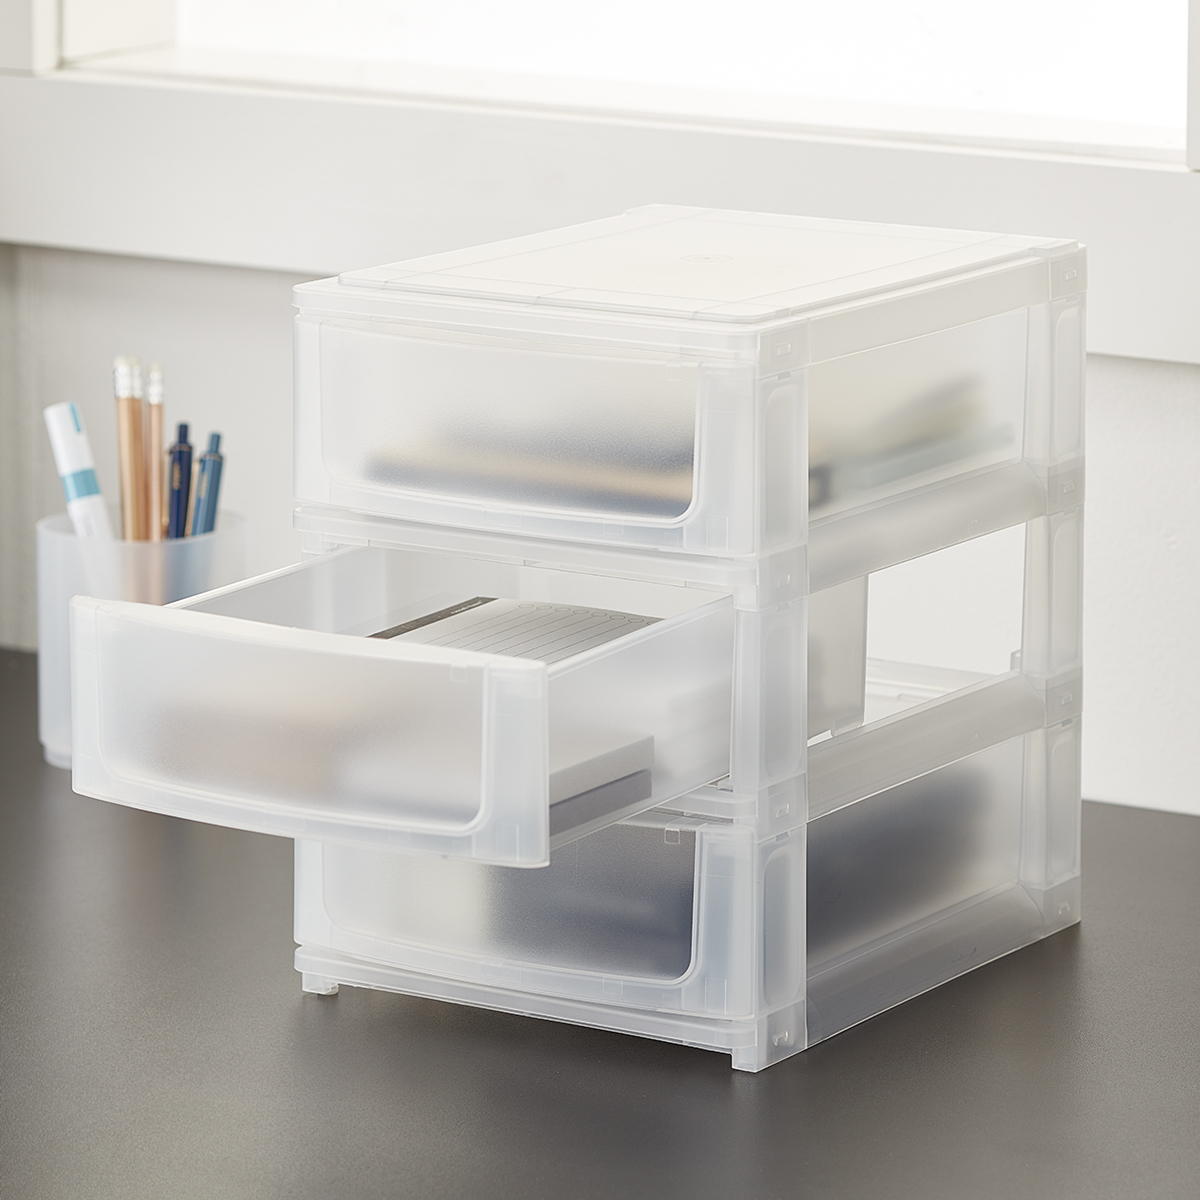 https://www.containerstore.com/catalogimages/434655/10079317_Shimo_small_3-drawer_stacki.jpg